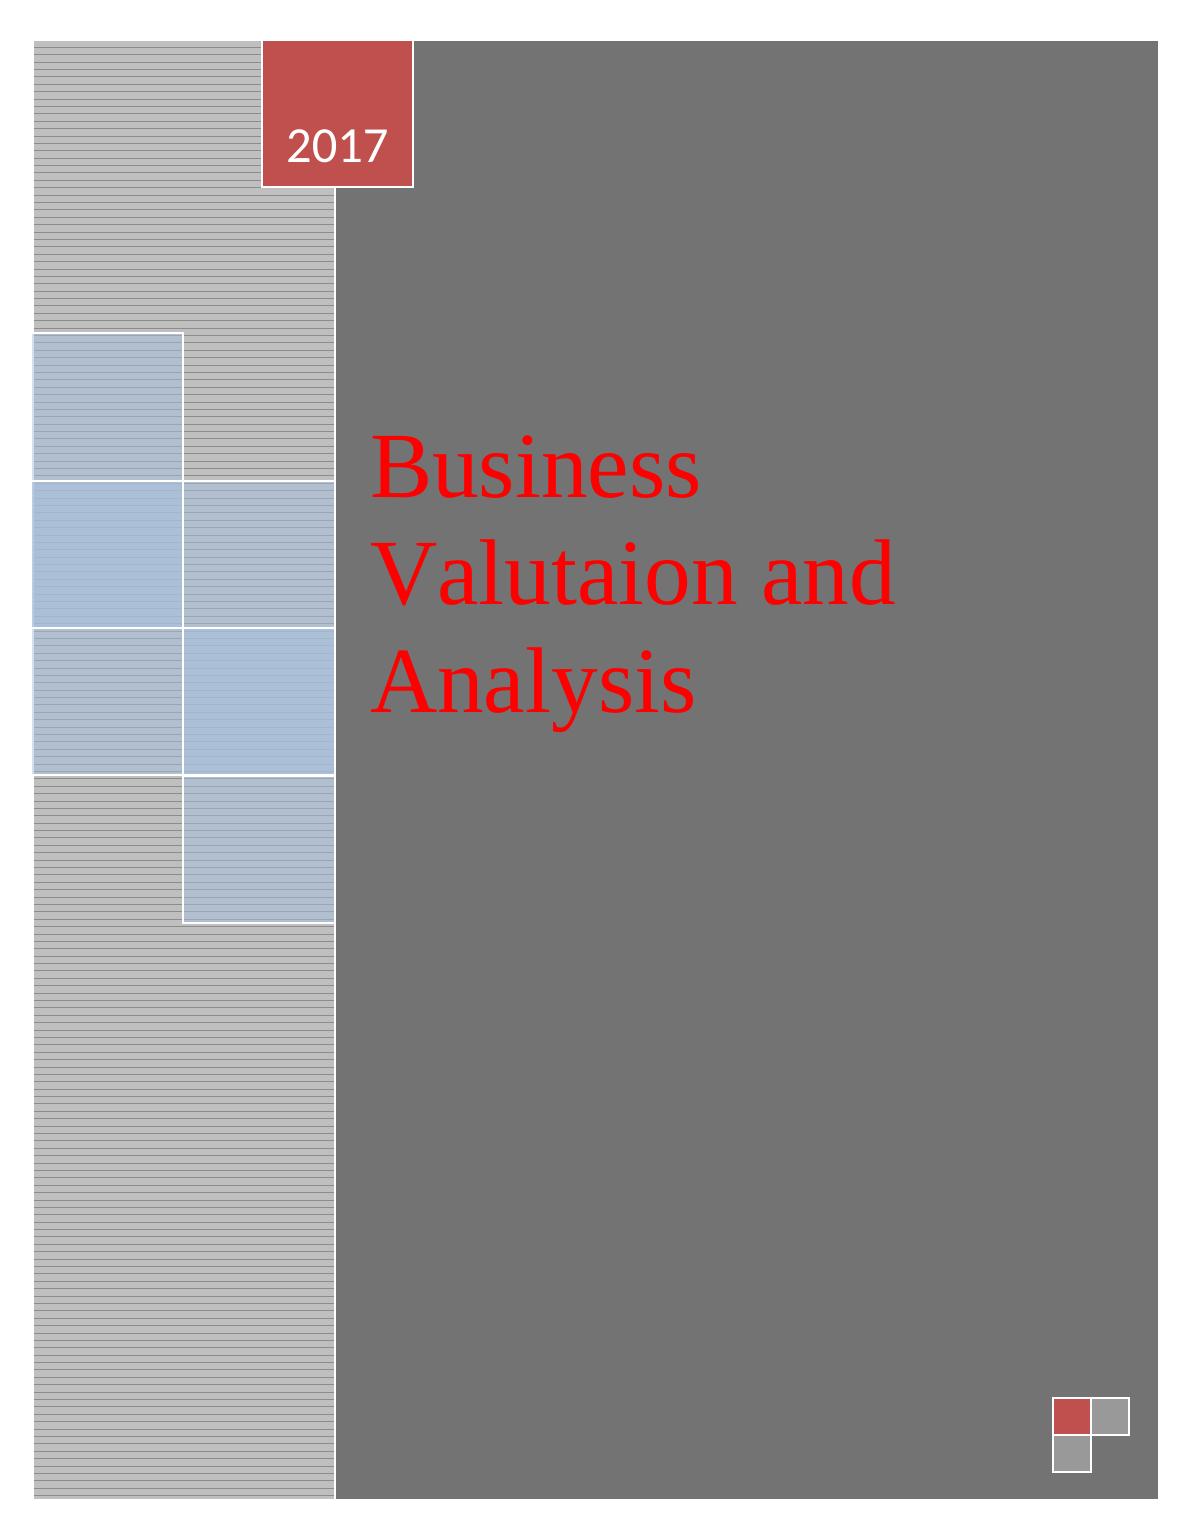 Business Valutaion and Analysis 2017 By student name Professor University_1